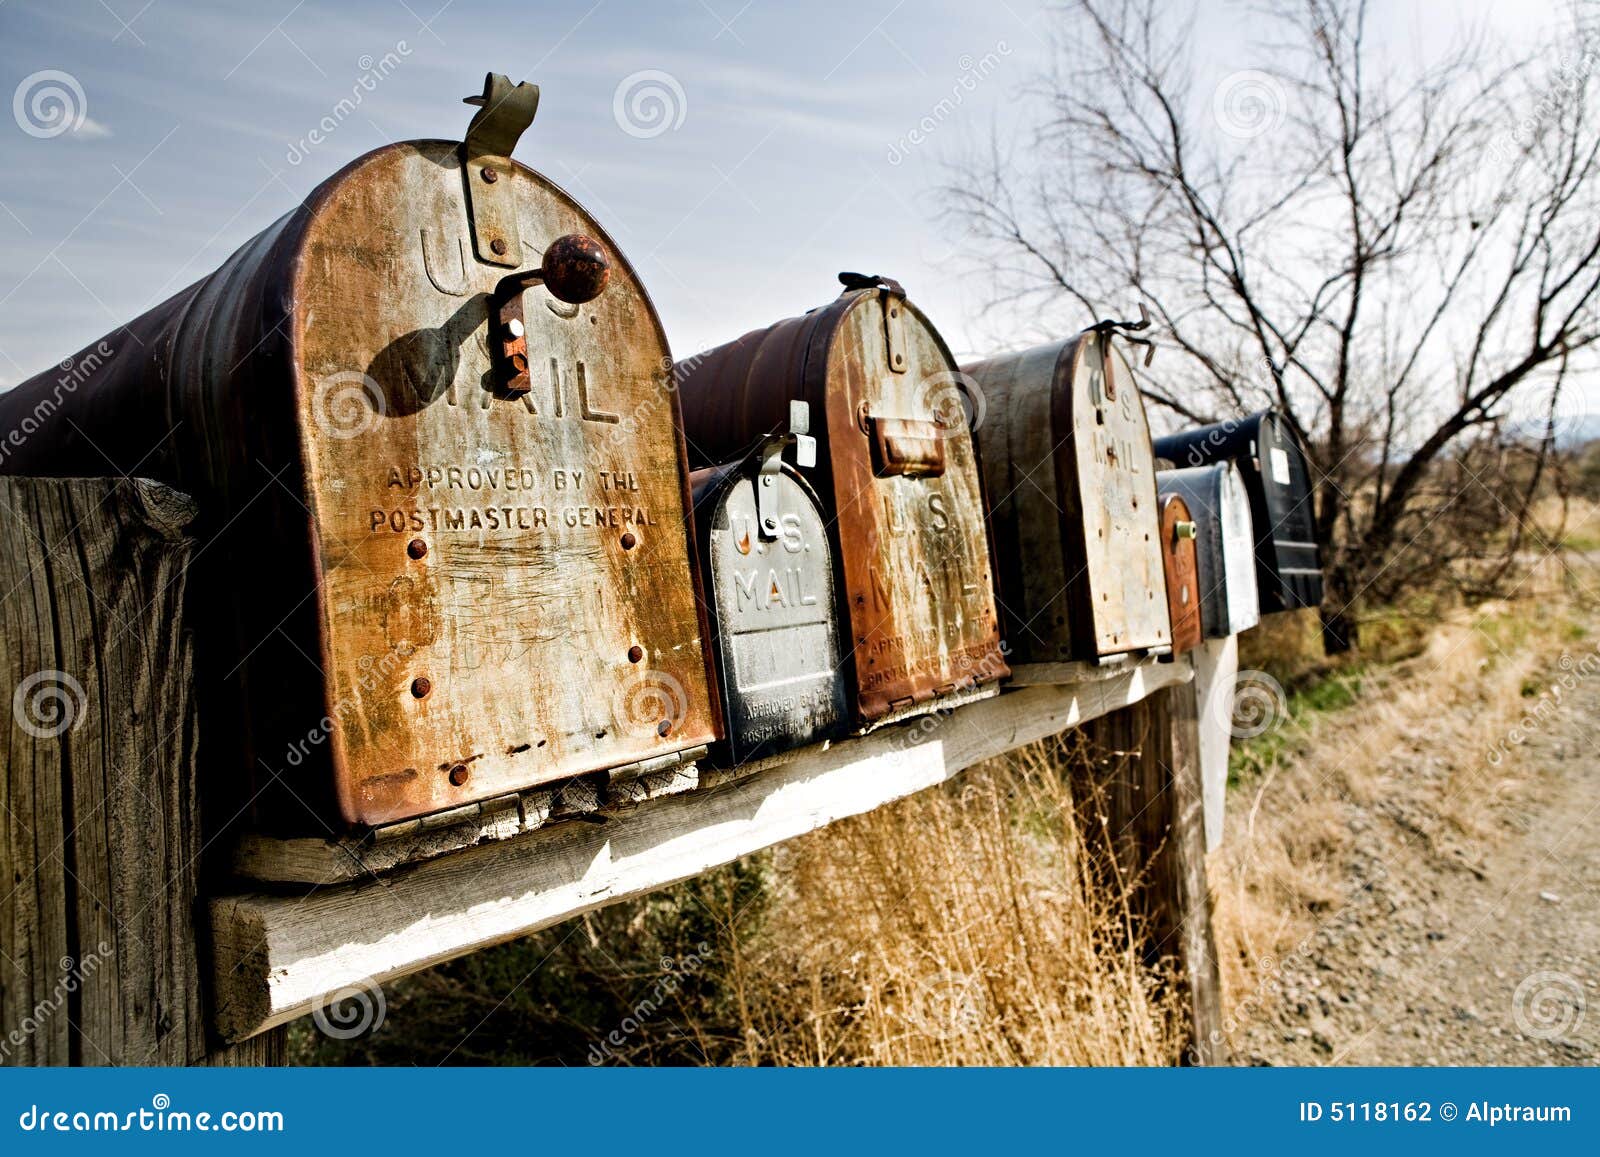 old mailboxes in midwest usa